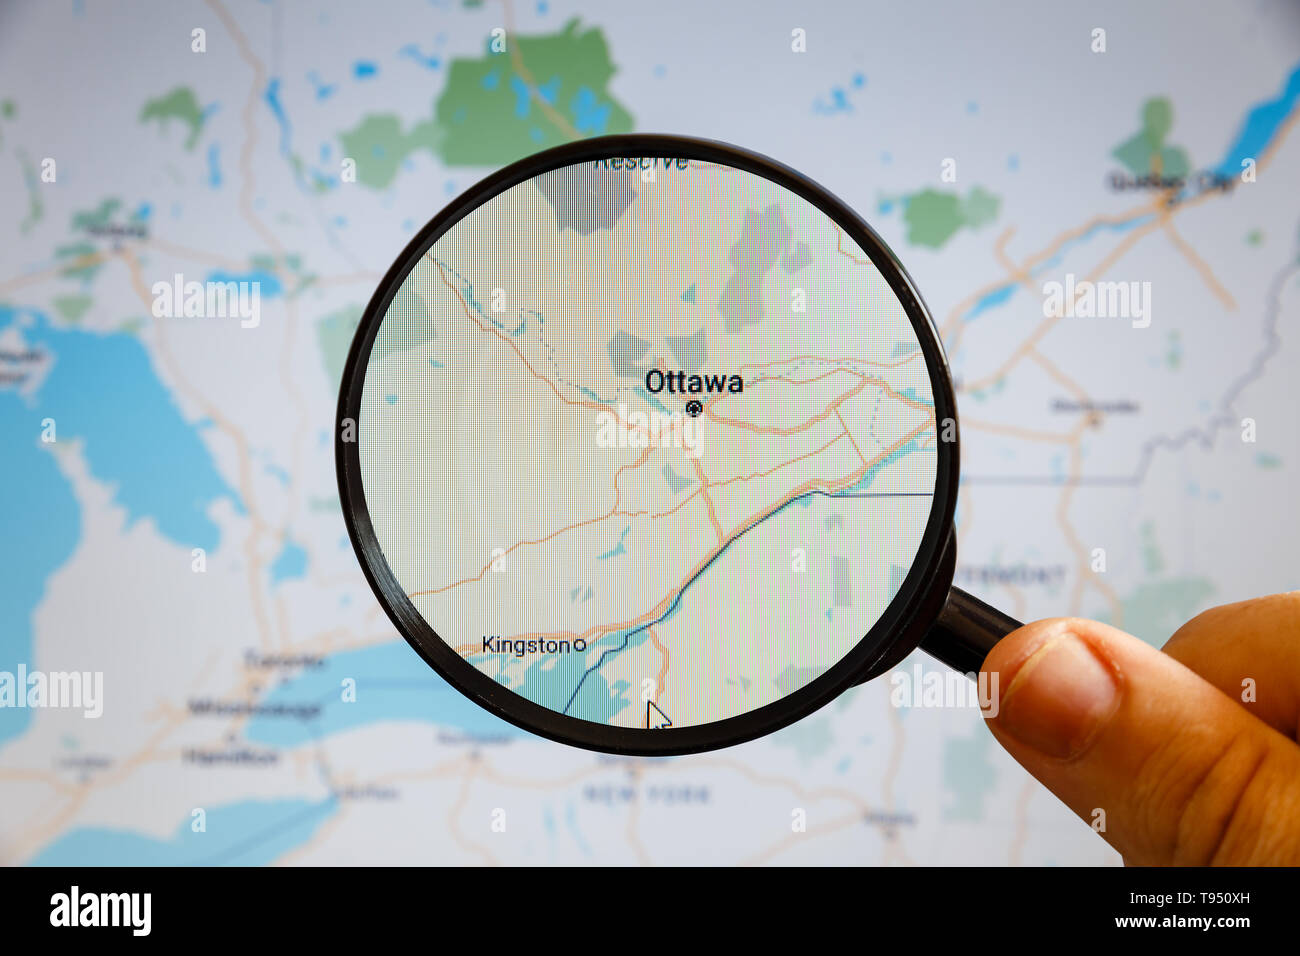 Ottawa, Canada. Political map. The city on the monitor screen through a magnifying glass in hand. Stock Photo